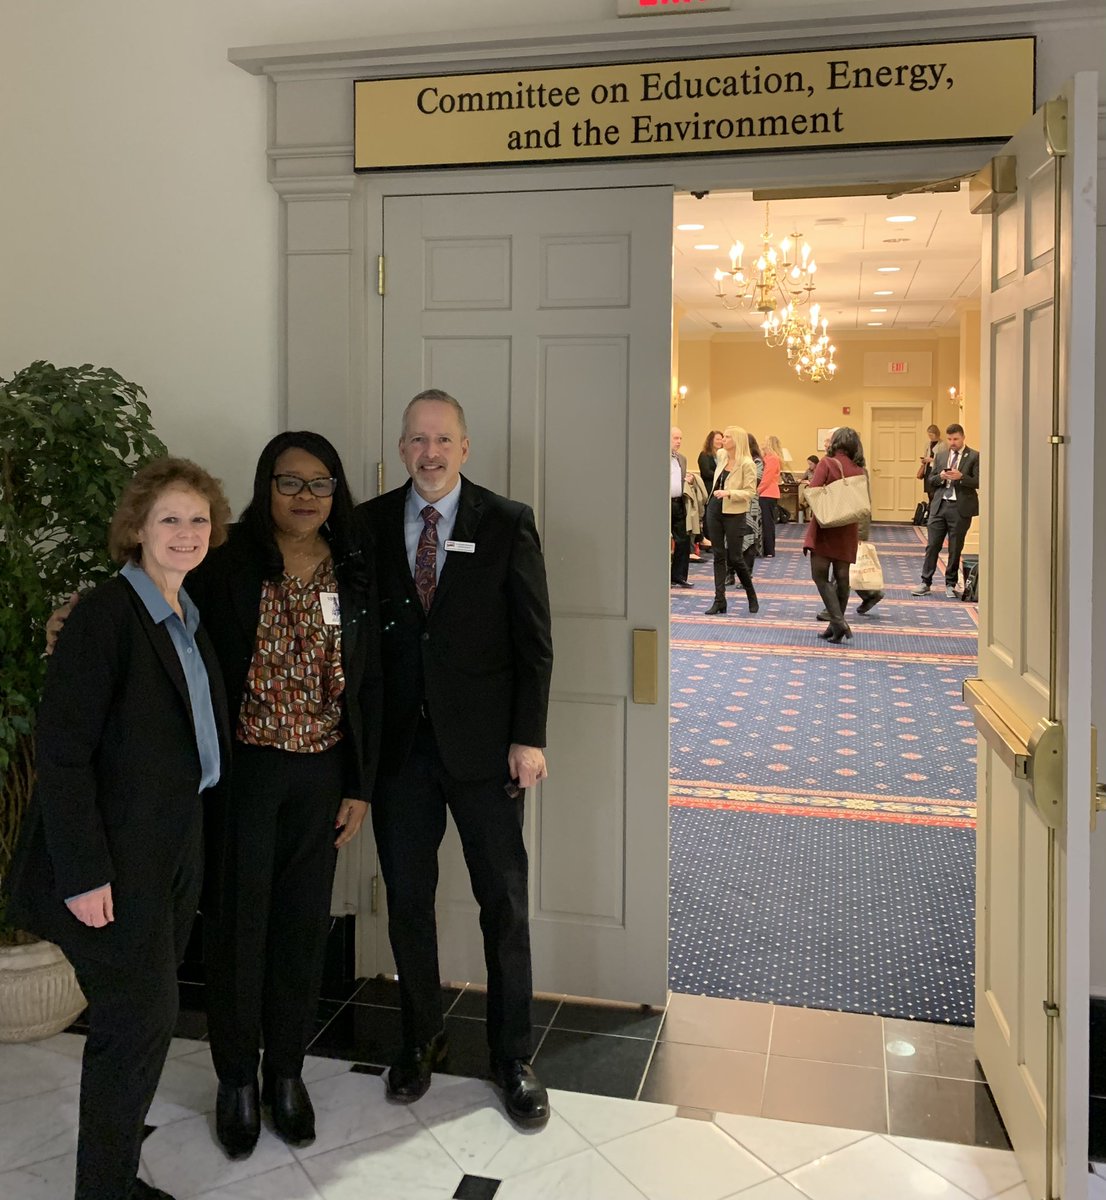 President, Tracy Hilliard; NAESP Rep, Lori Phelps; and Executive Director, Christopher Wooleyhand, testified in favor of Senate Bill 598 in Annapolis today. #Advocacy